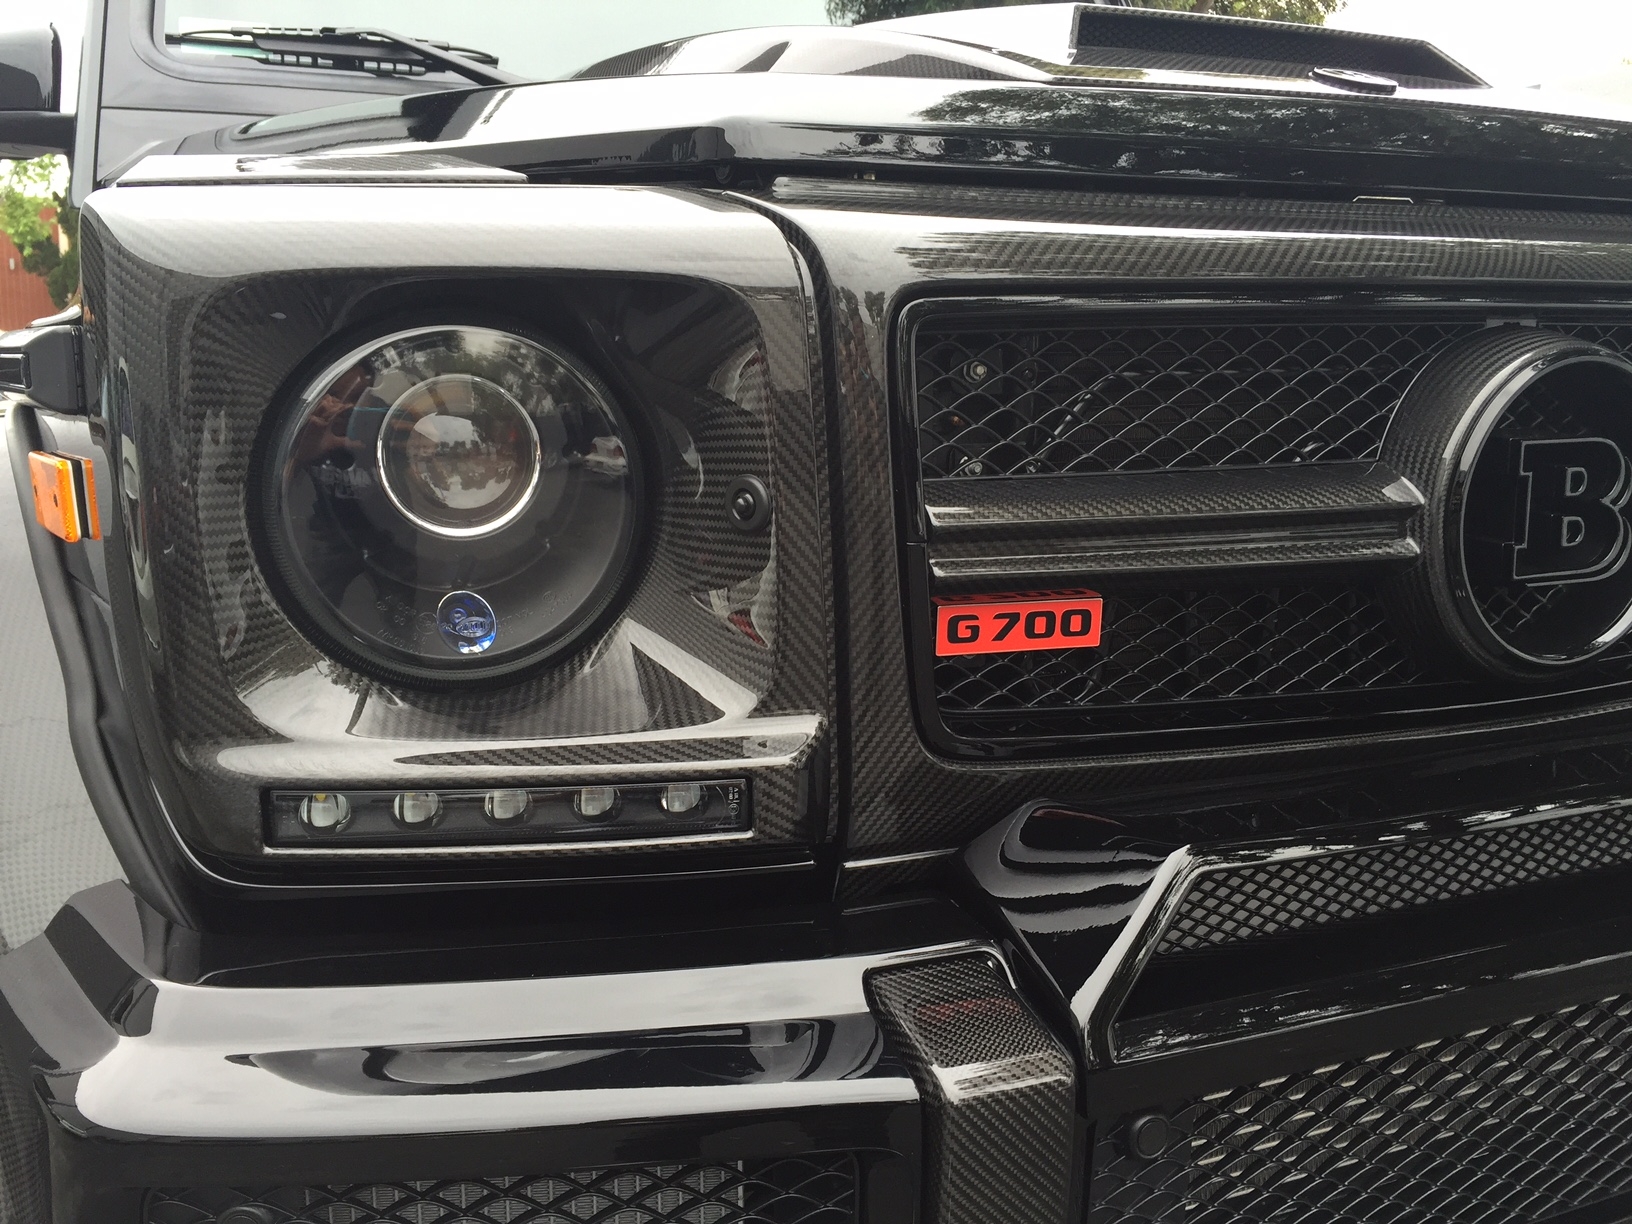 BRABUS Design Radiator Grille Visible Carbon Glossy for G63/G65, G63 6x6, G500 4x4-0